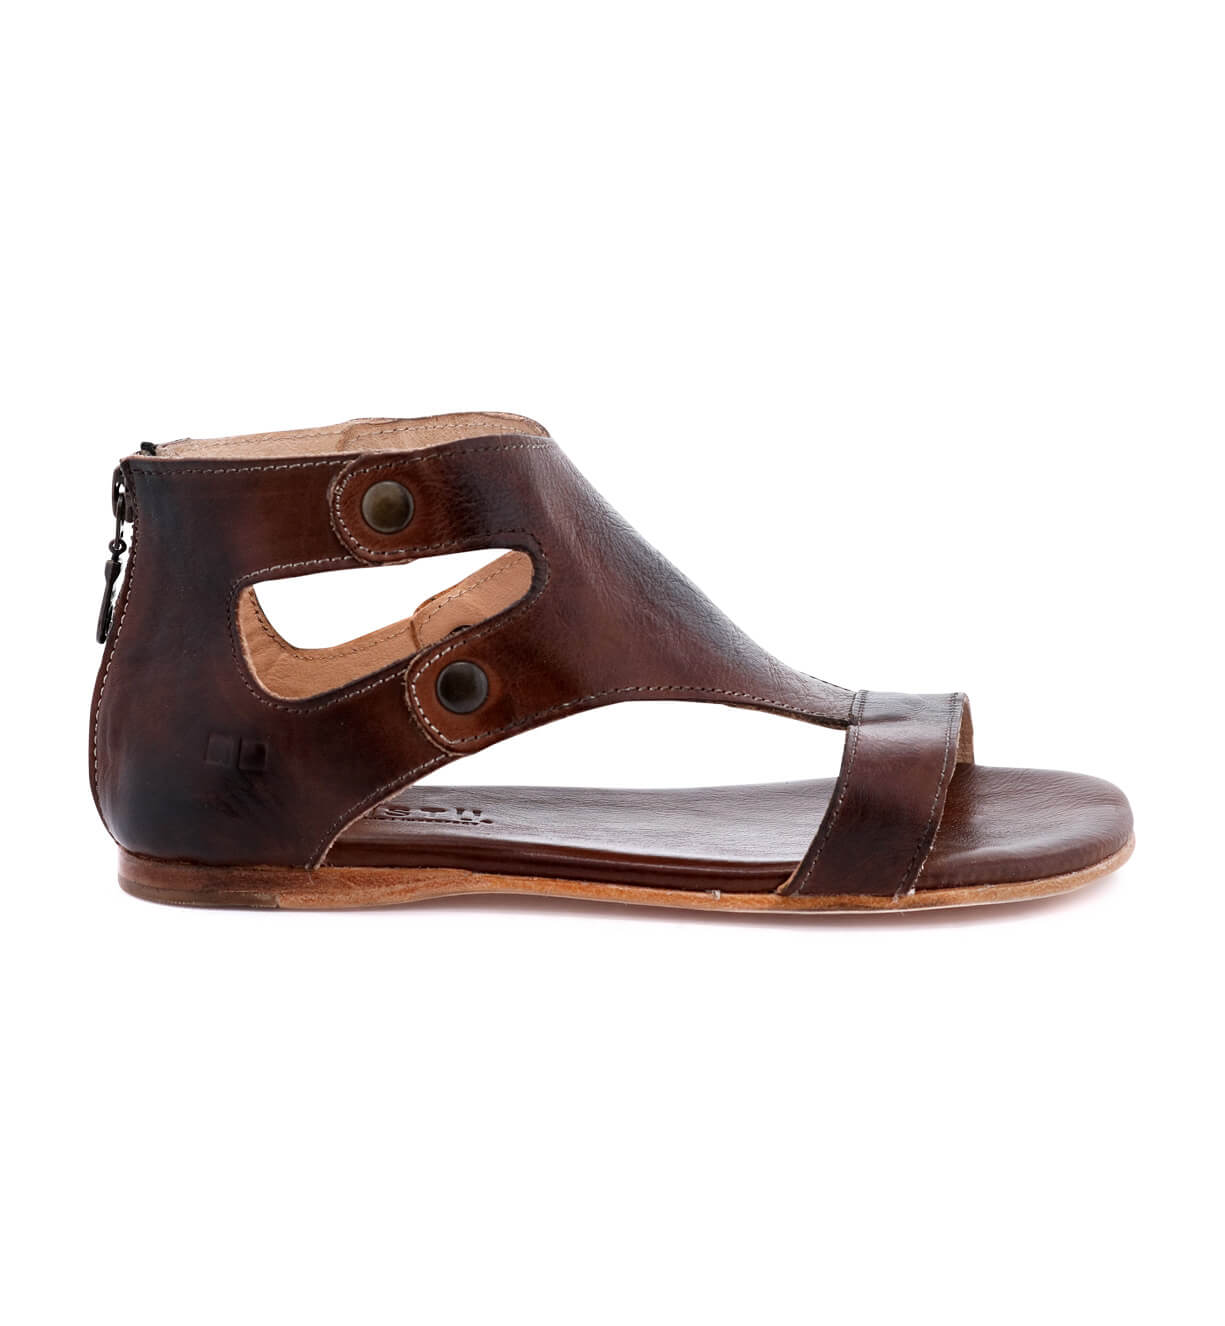 A women's Soto sandal by Bed Stu, made from teak leather with an open toe.